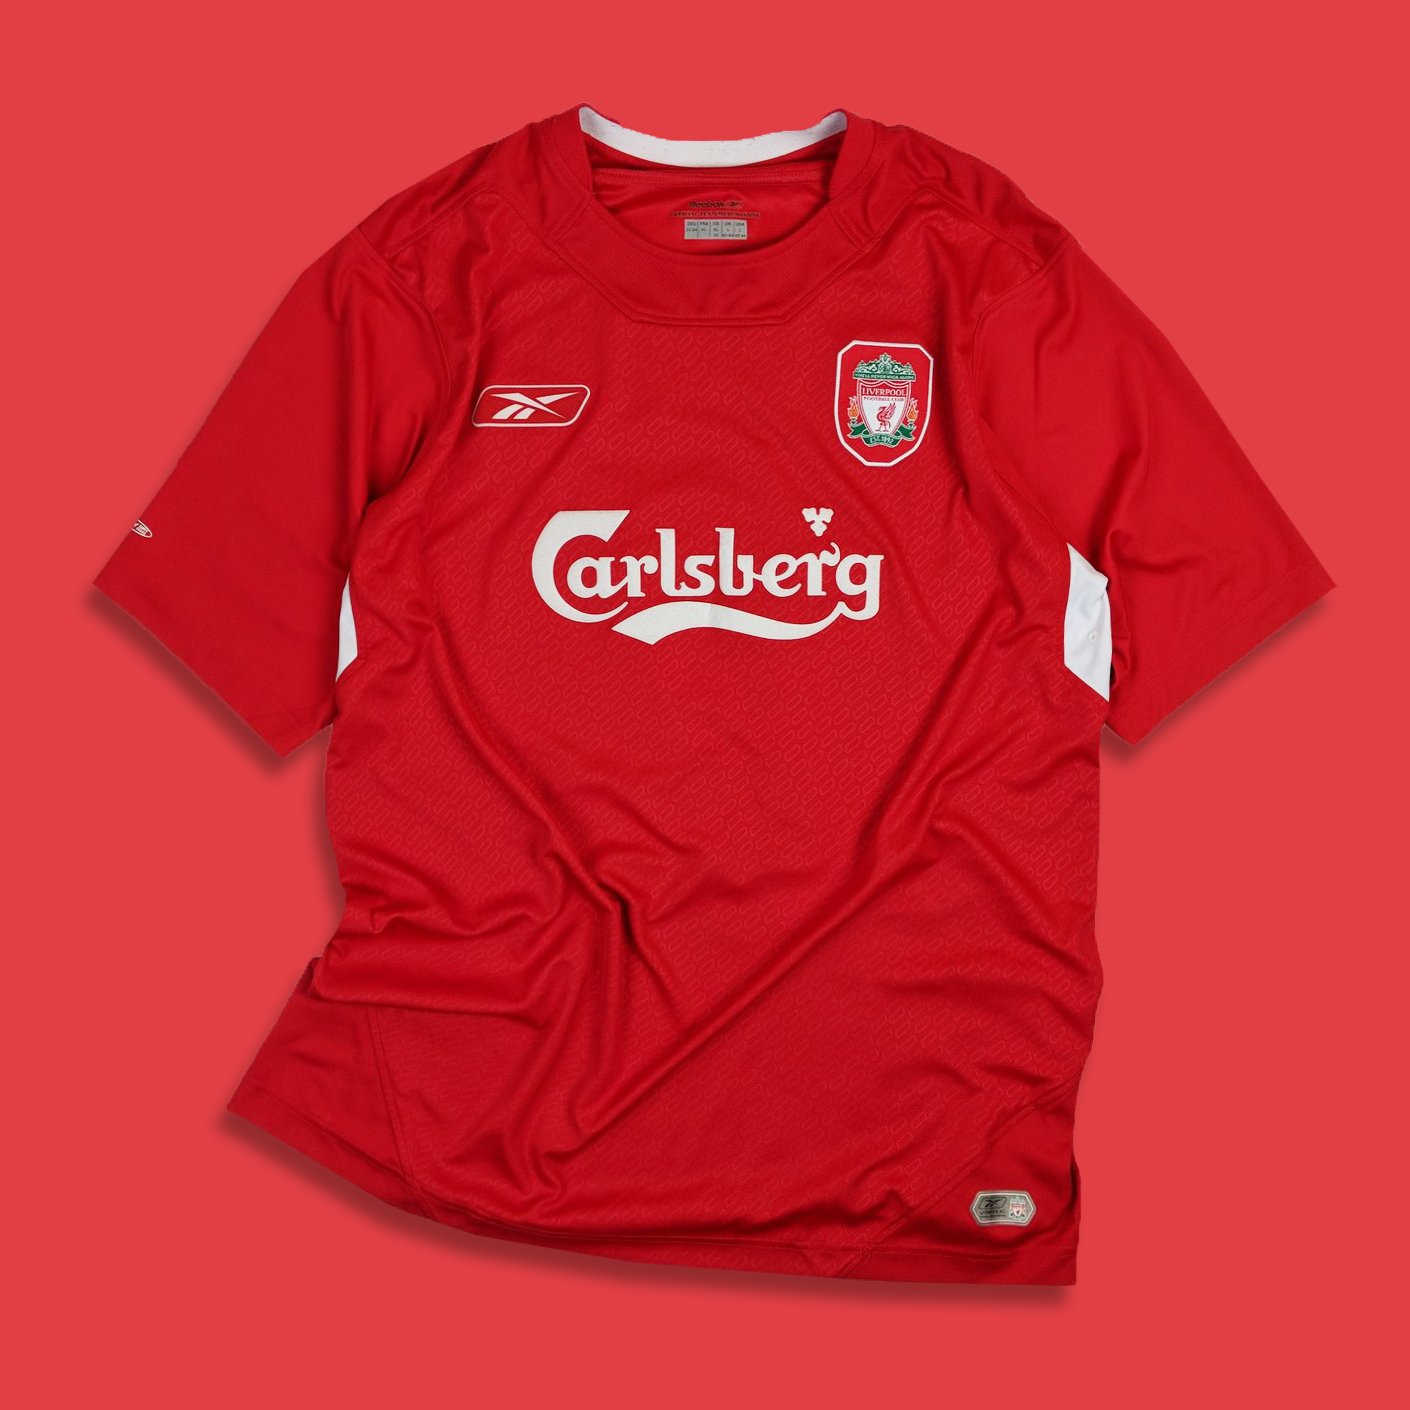 Fonetik spil sirene Classic Football Shirts on Twitter: "Liverpool 2004-05 home by Reebok as  worn when Liverpool went on an amazing run to lift the Champions League  trophy in 2005 Shop classic #LFC here -